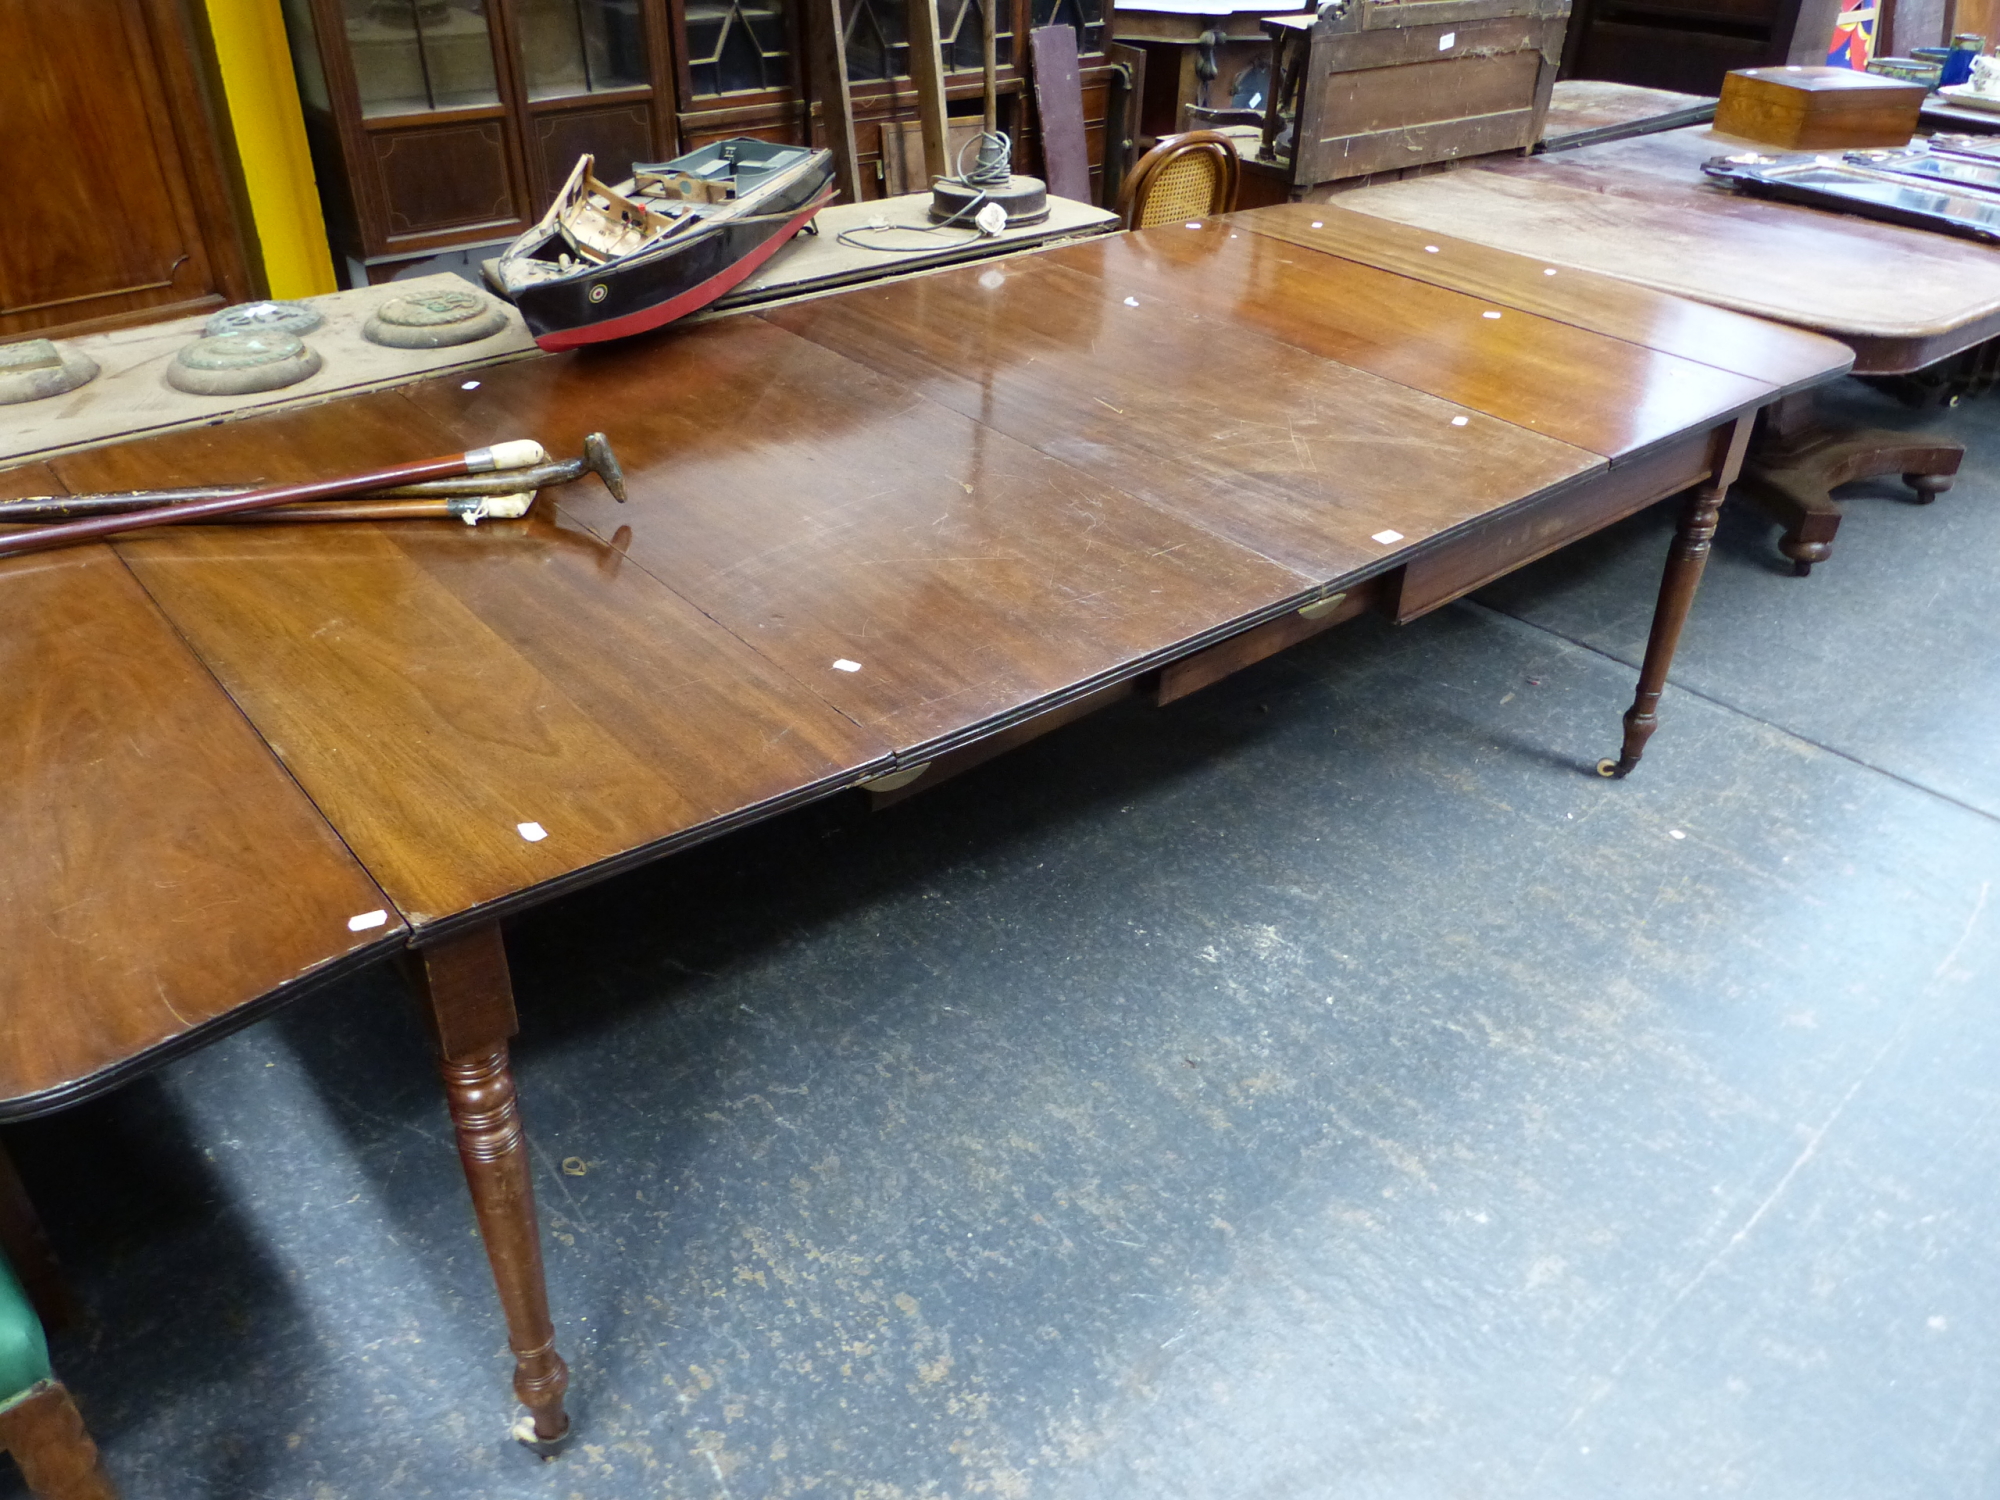 A REGENCY EXTENDING DINING TABLE DROP LEAF ENDS, WIDTH OPEN 272 cm's (WITH TWO EXTENSION LEAVES)